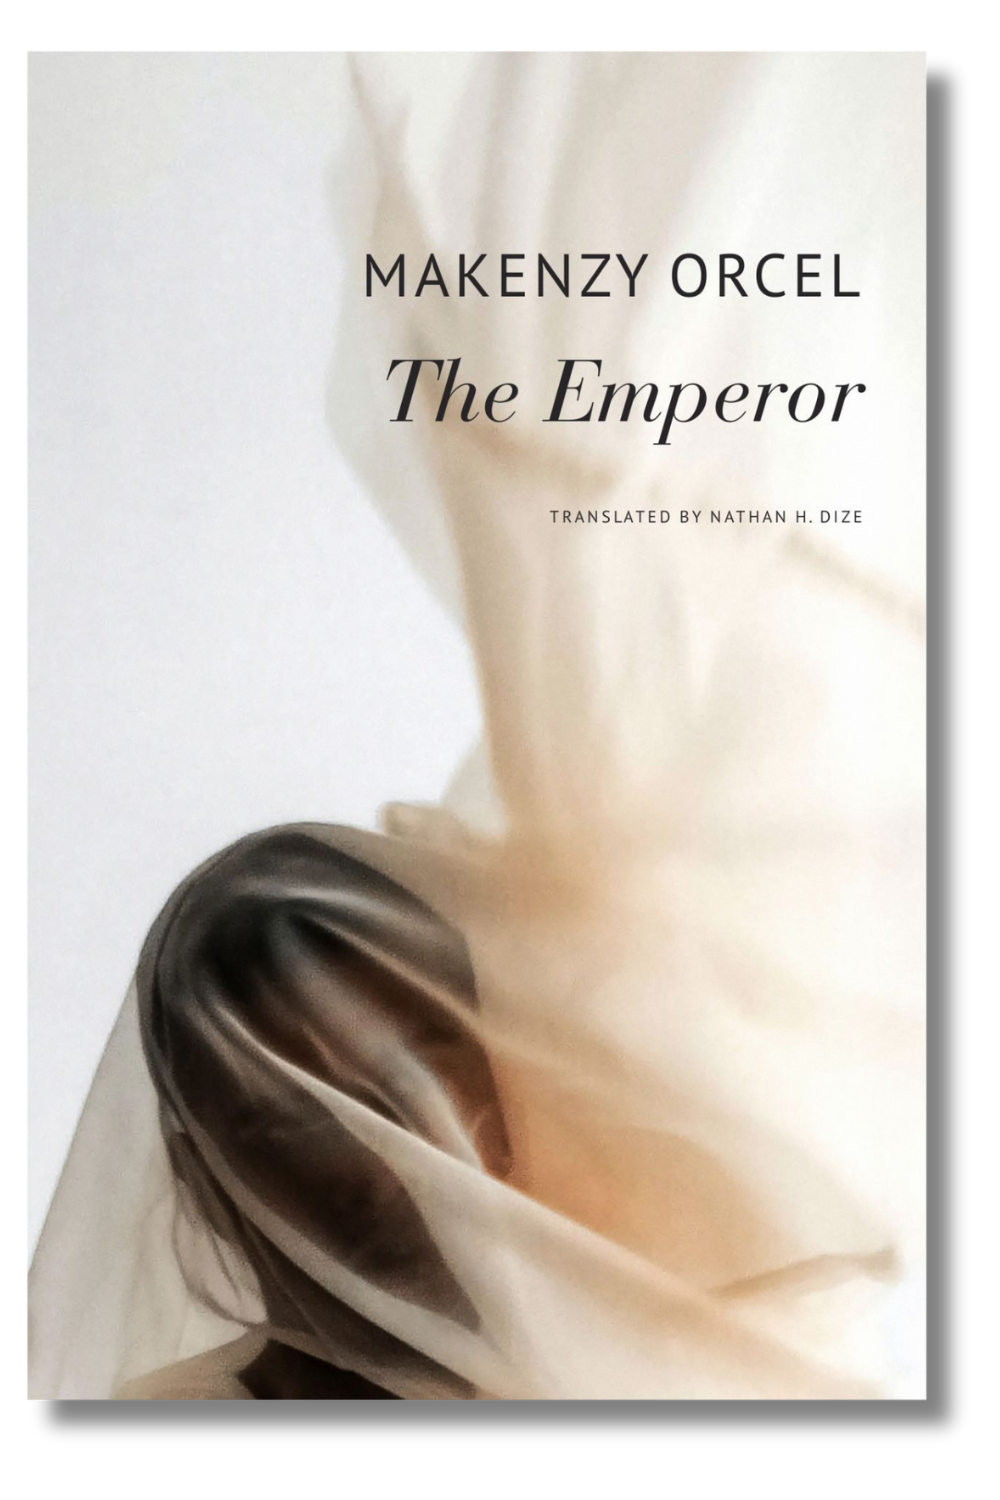 The cover of "The Emperor" by Makenzy Orcel, translated by Nathan H. Dize